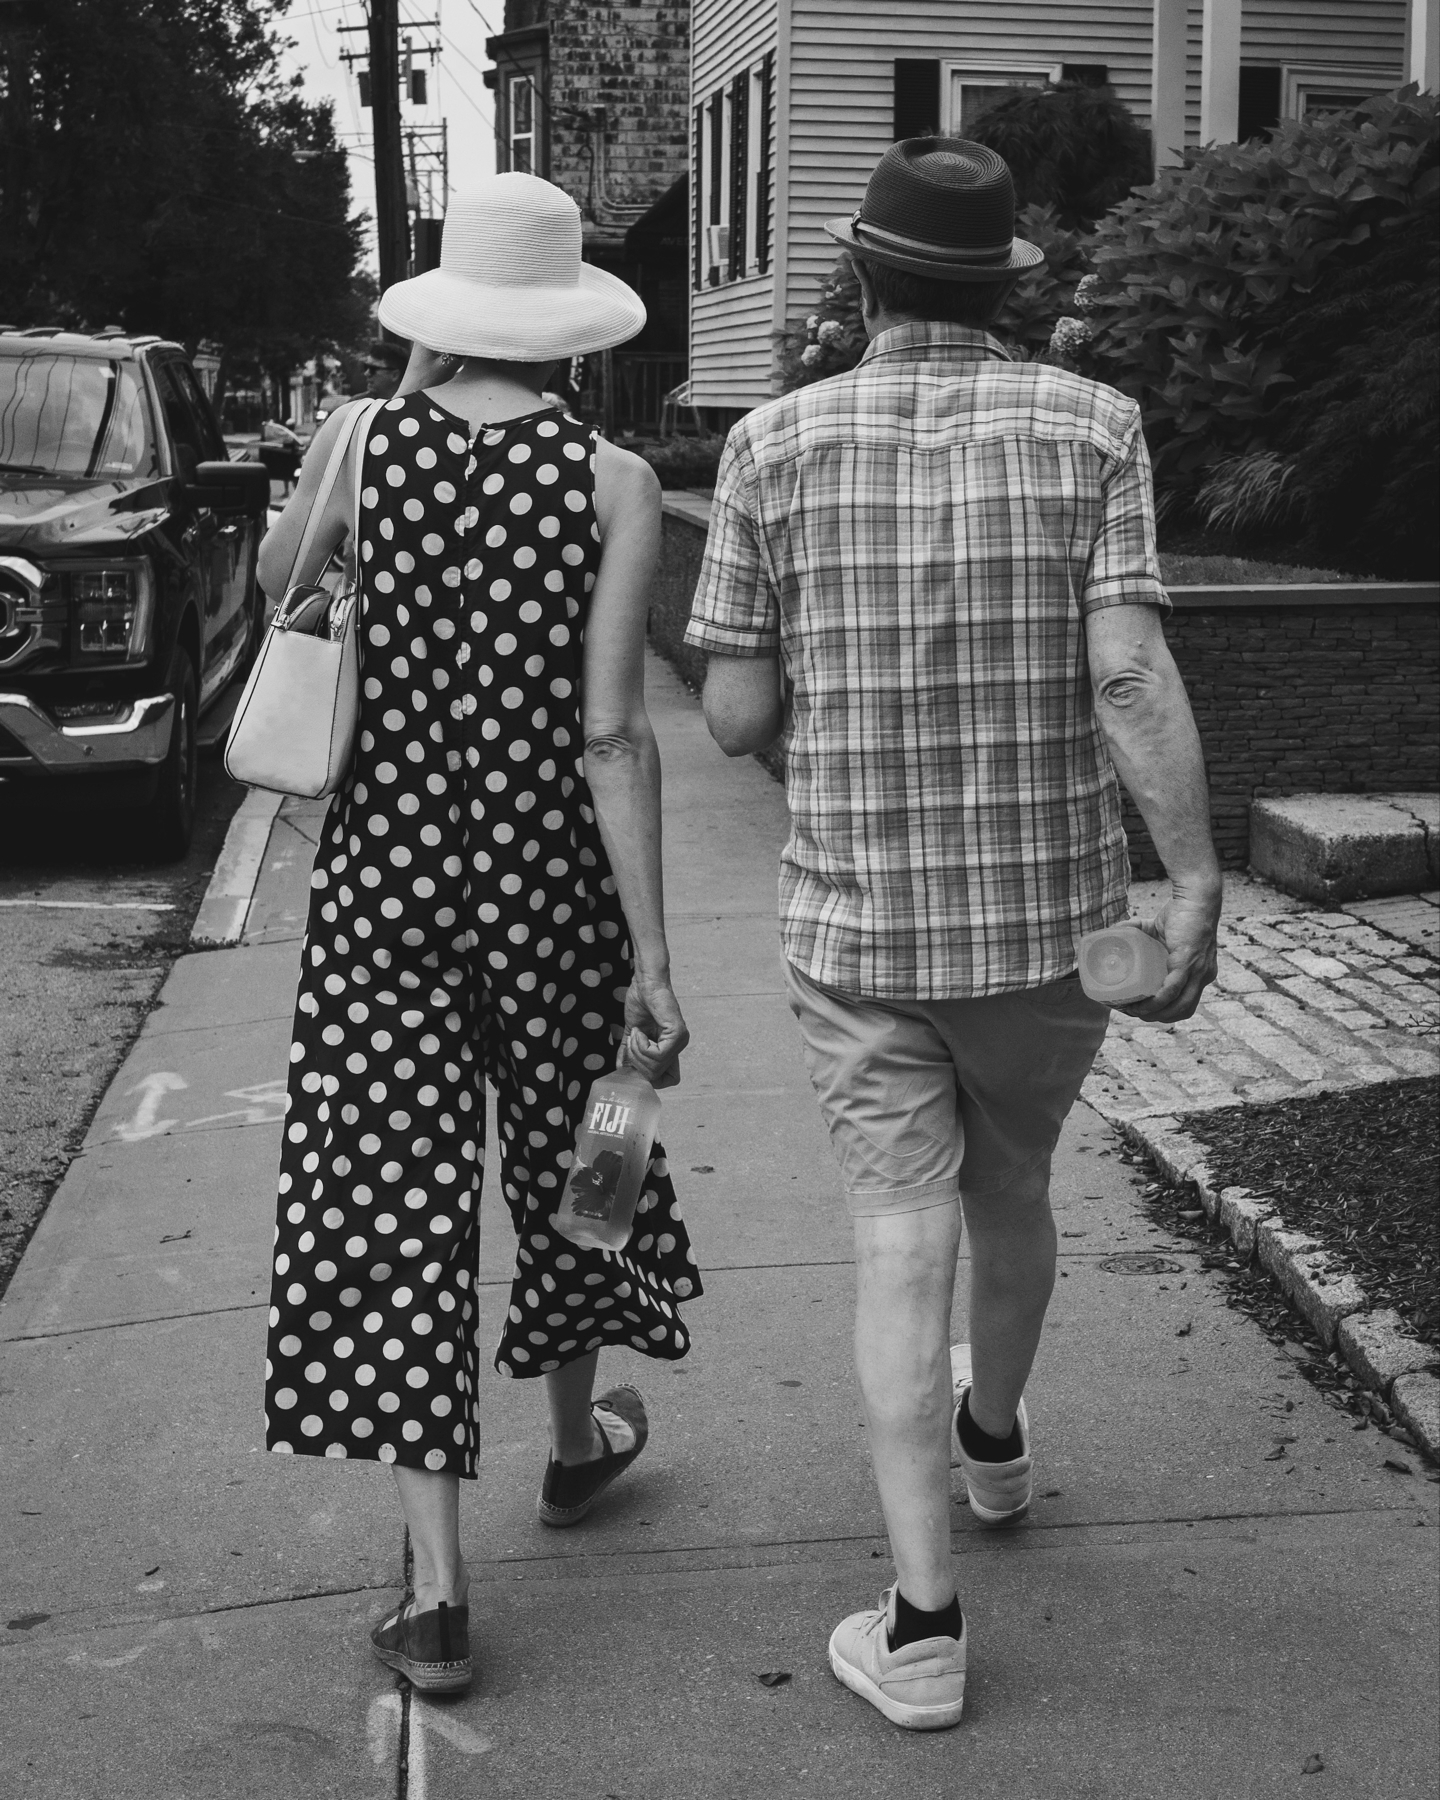 A black and white photo of a two people walking side by side on a sidewalk. One is wearing a polka dot dress and a white sun hat, carrying a white handbag and a water bottle. The other is in a plaid shirt and dark brimmed hat, also carrying a water bottle.